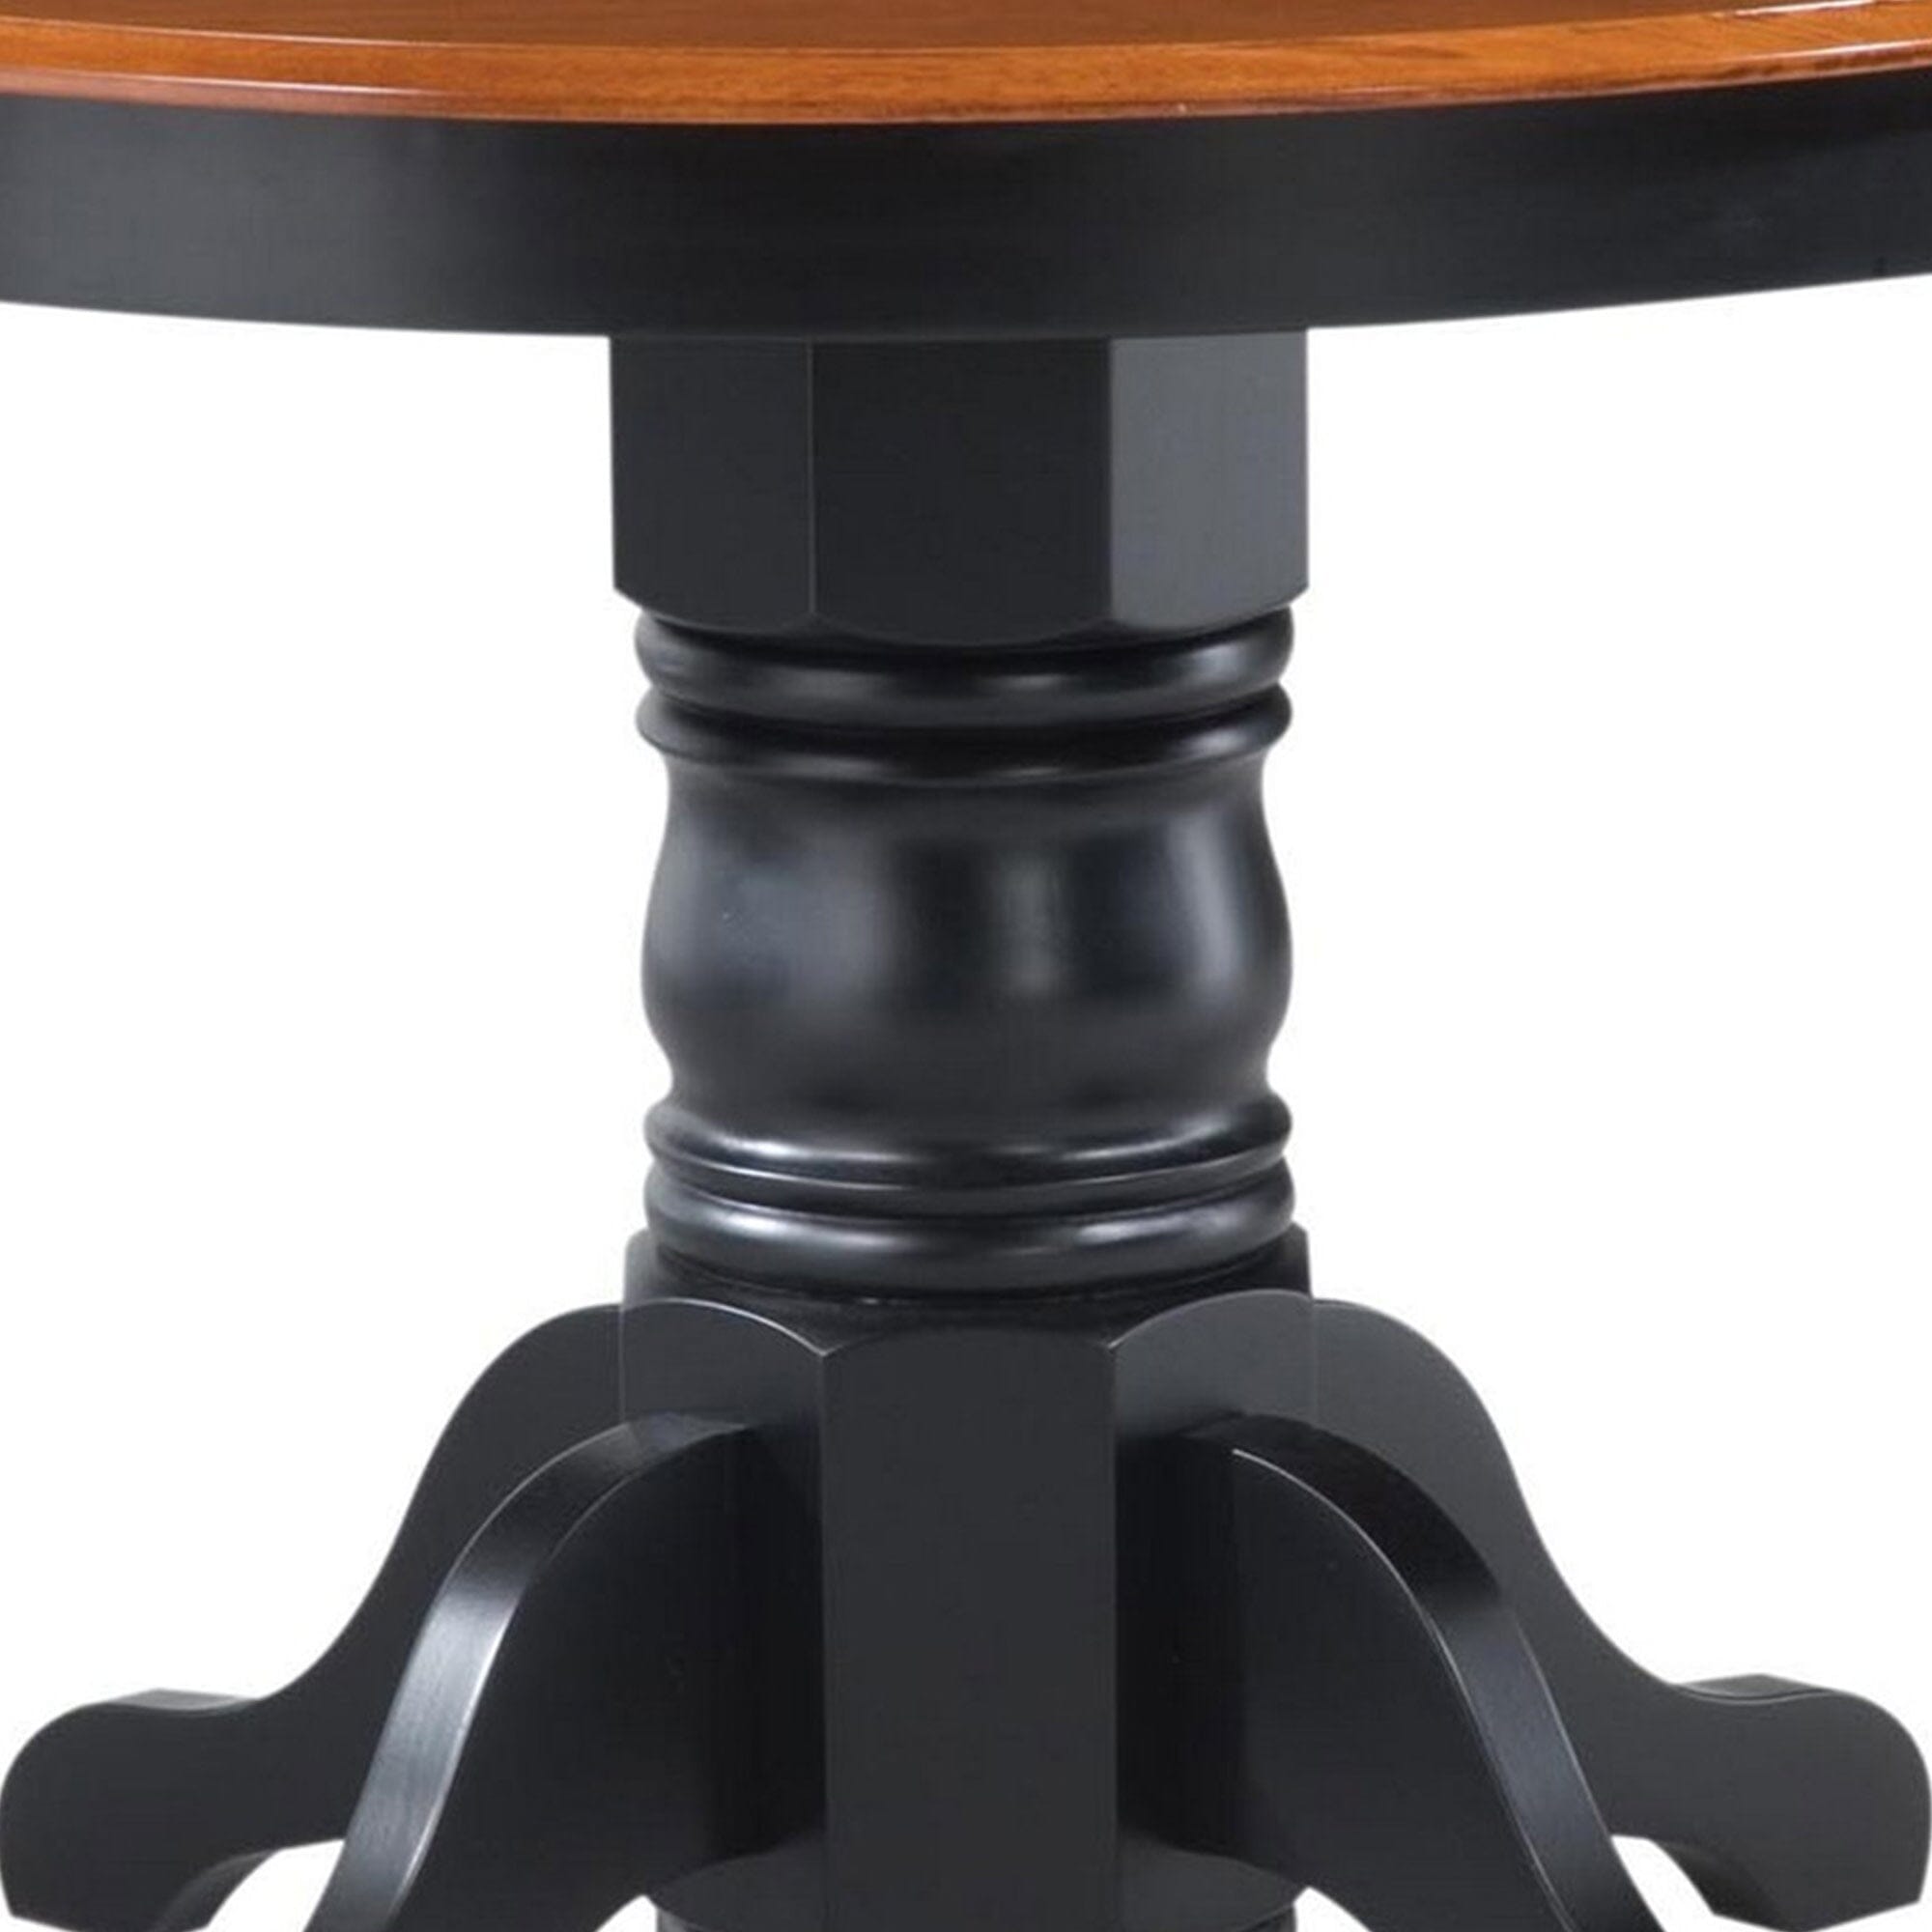 Traditional Pedestal Dining Table By Bishop Dining Table Bishop